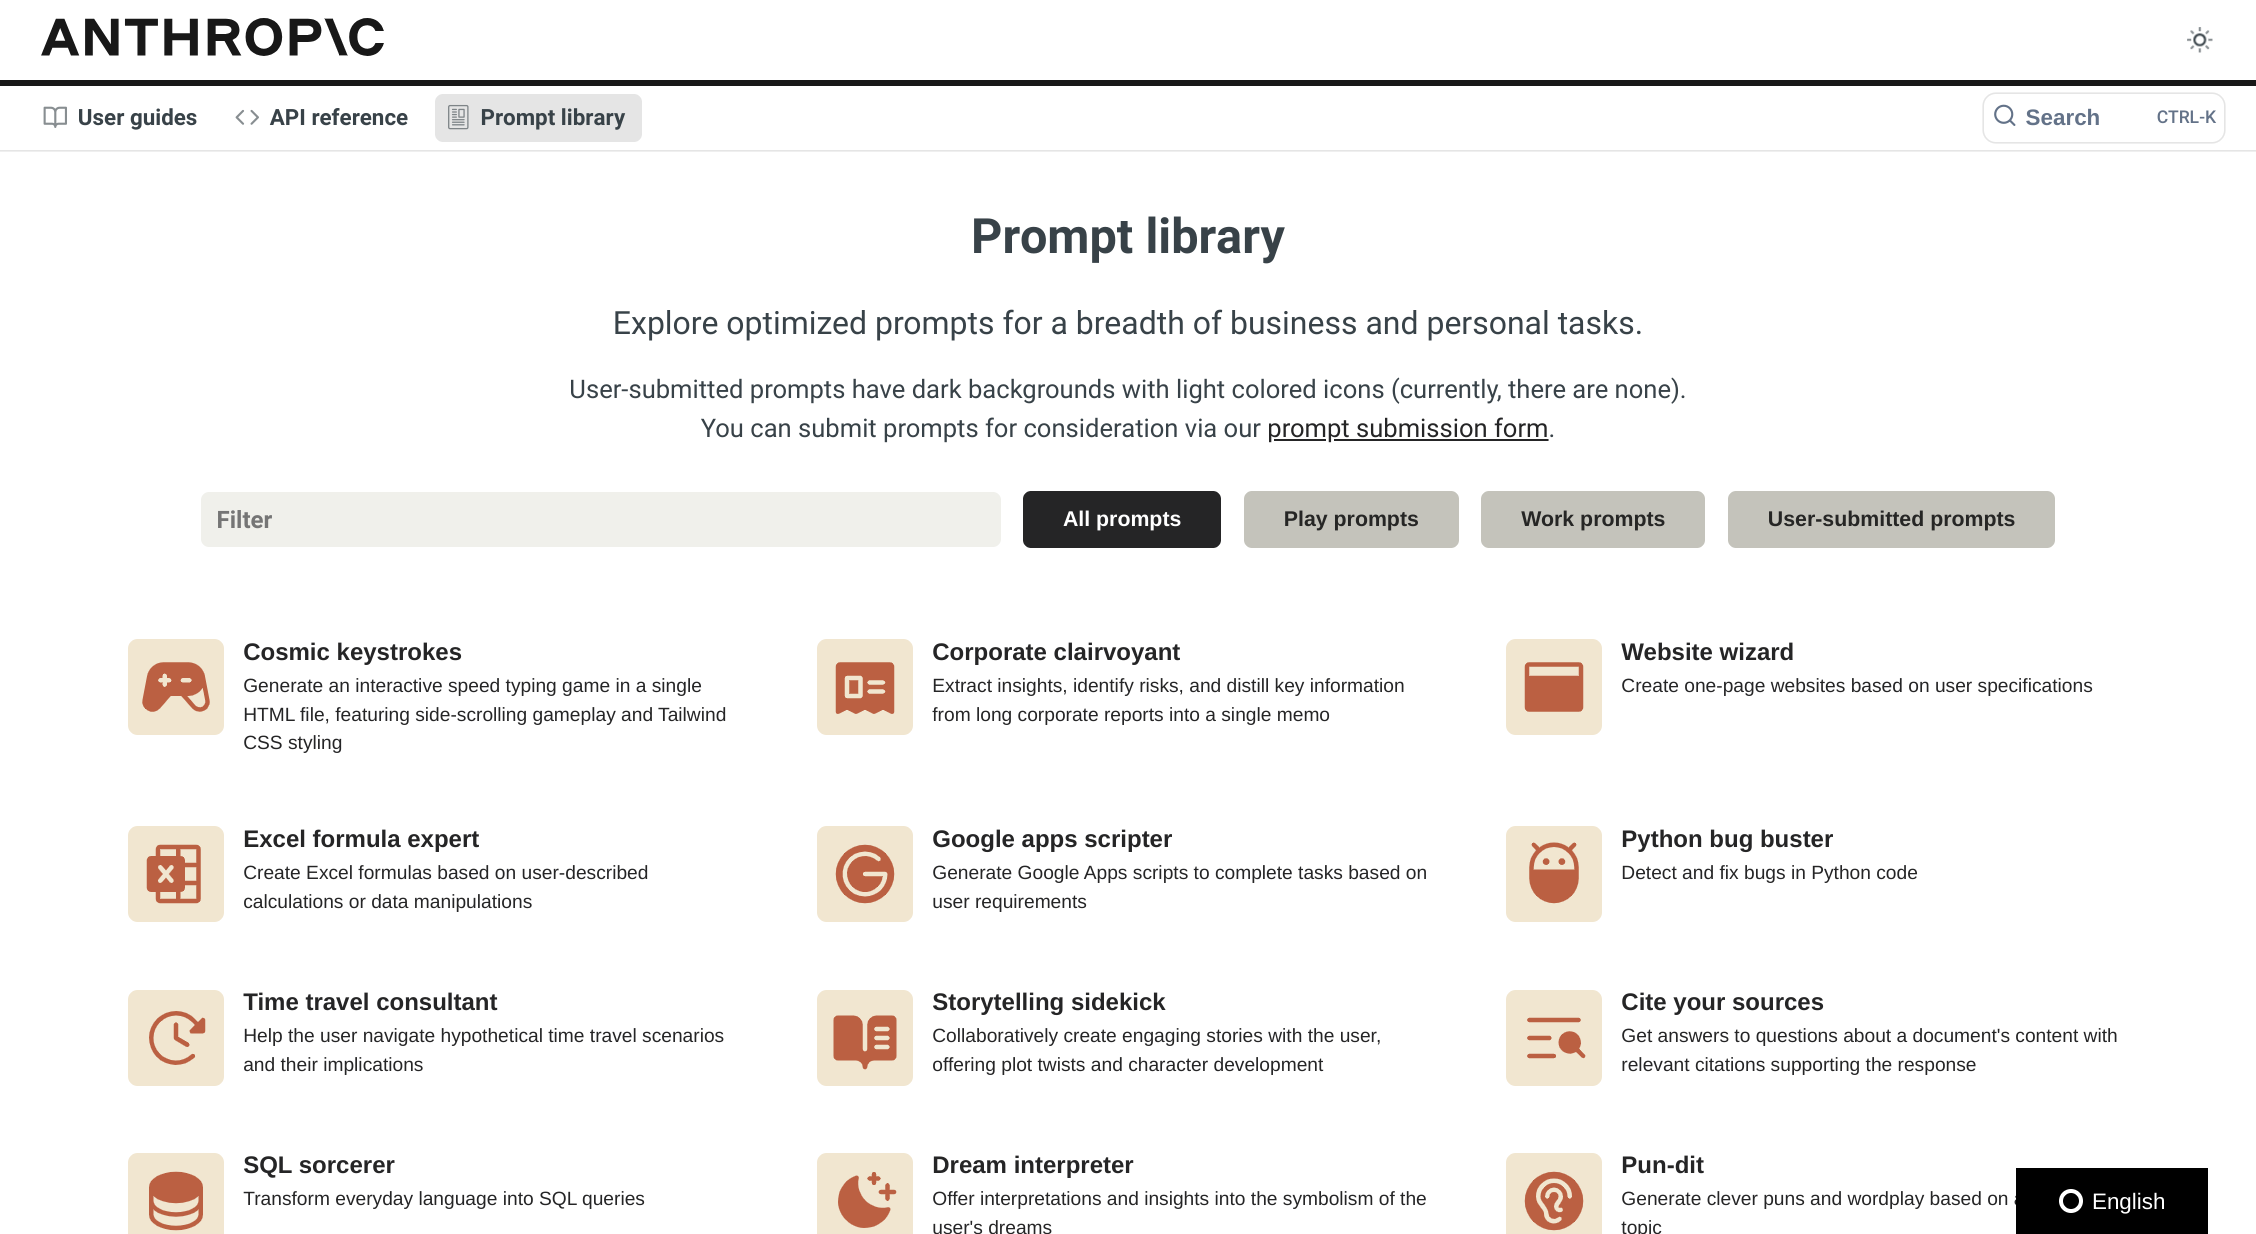 Screenshot of Anthropic's Prompt Library